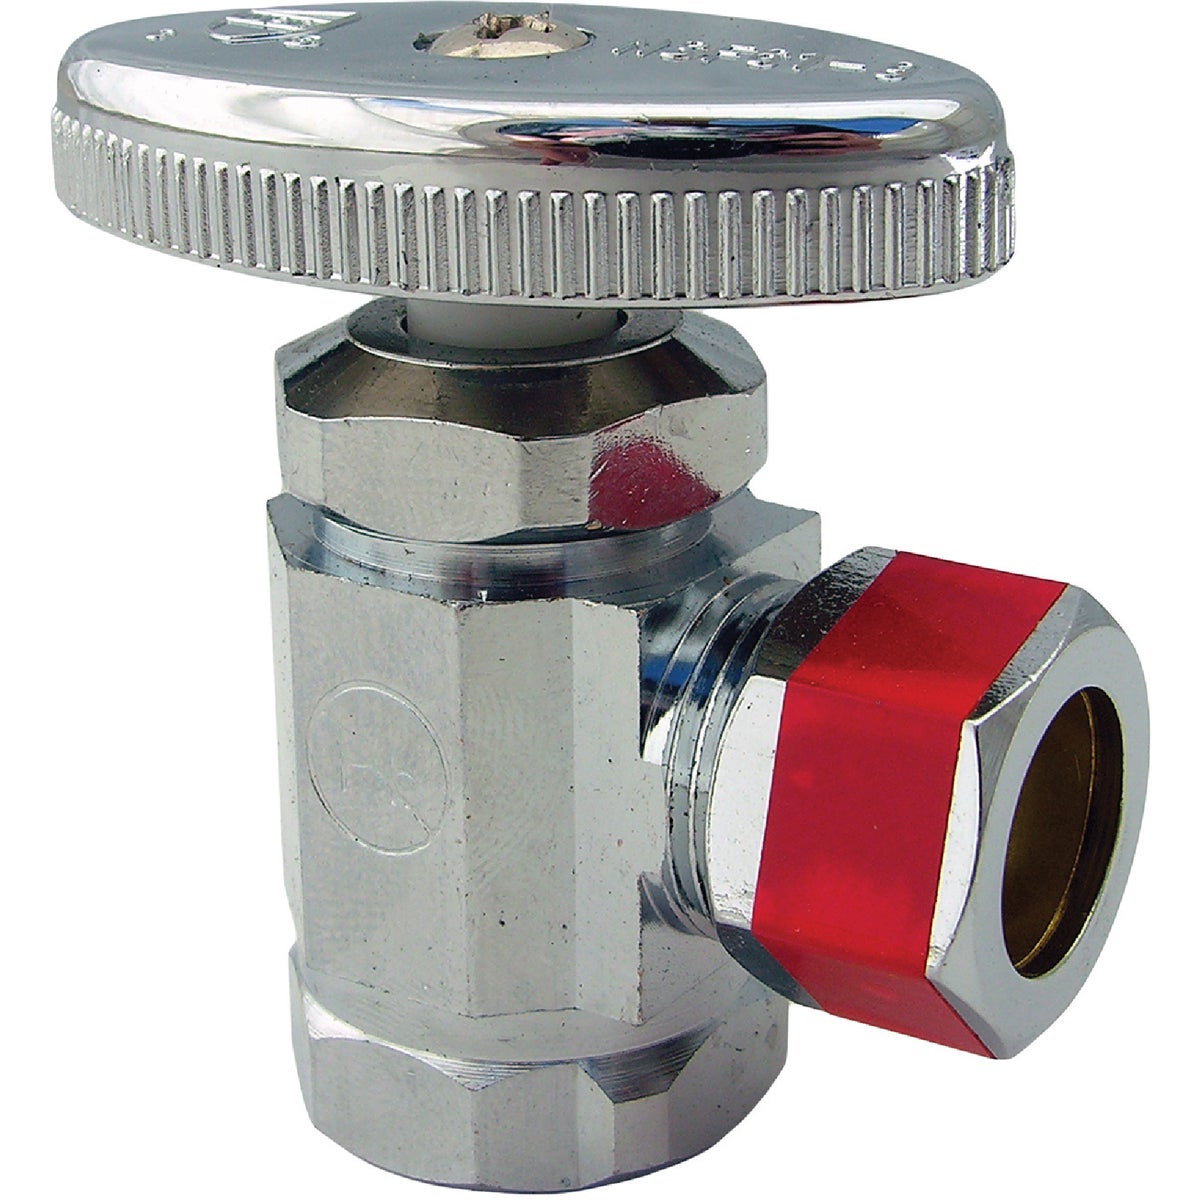 Lasco 1/2 In. FIP Inlet x 1/2 In. Compression Outlet Multi-Turn Style Angle Valve